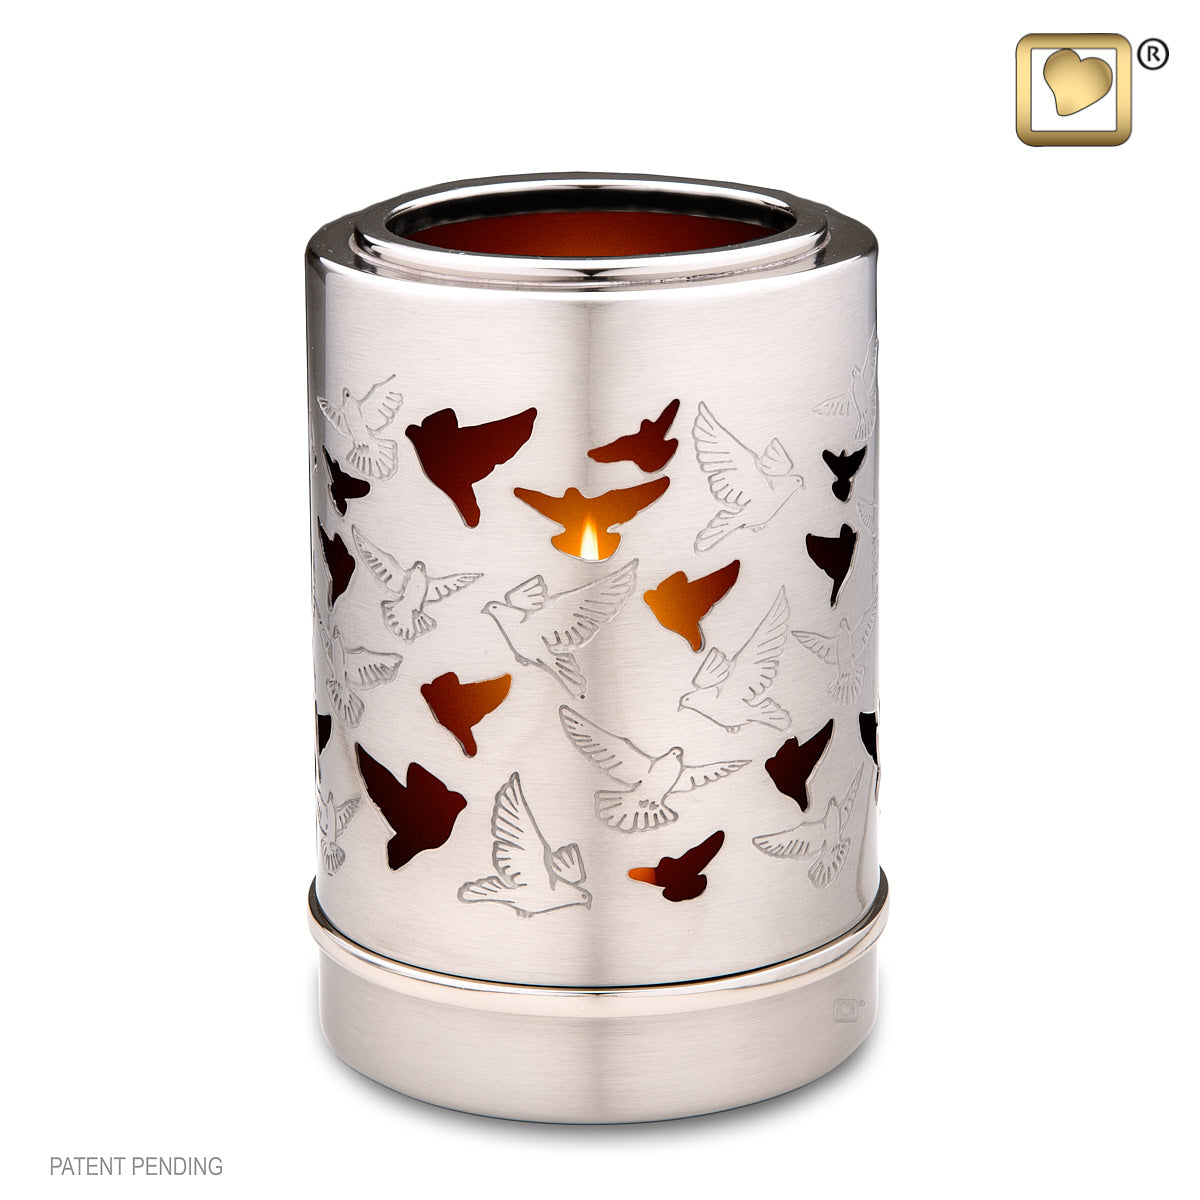 Reflections of Soul (Tealight Urn)